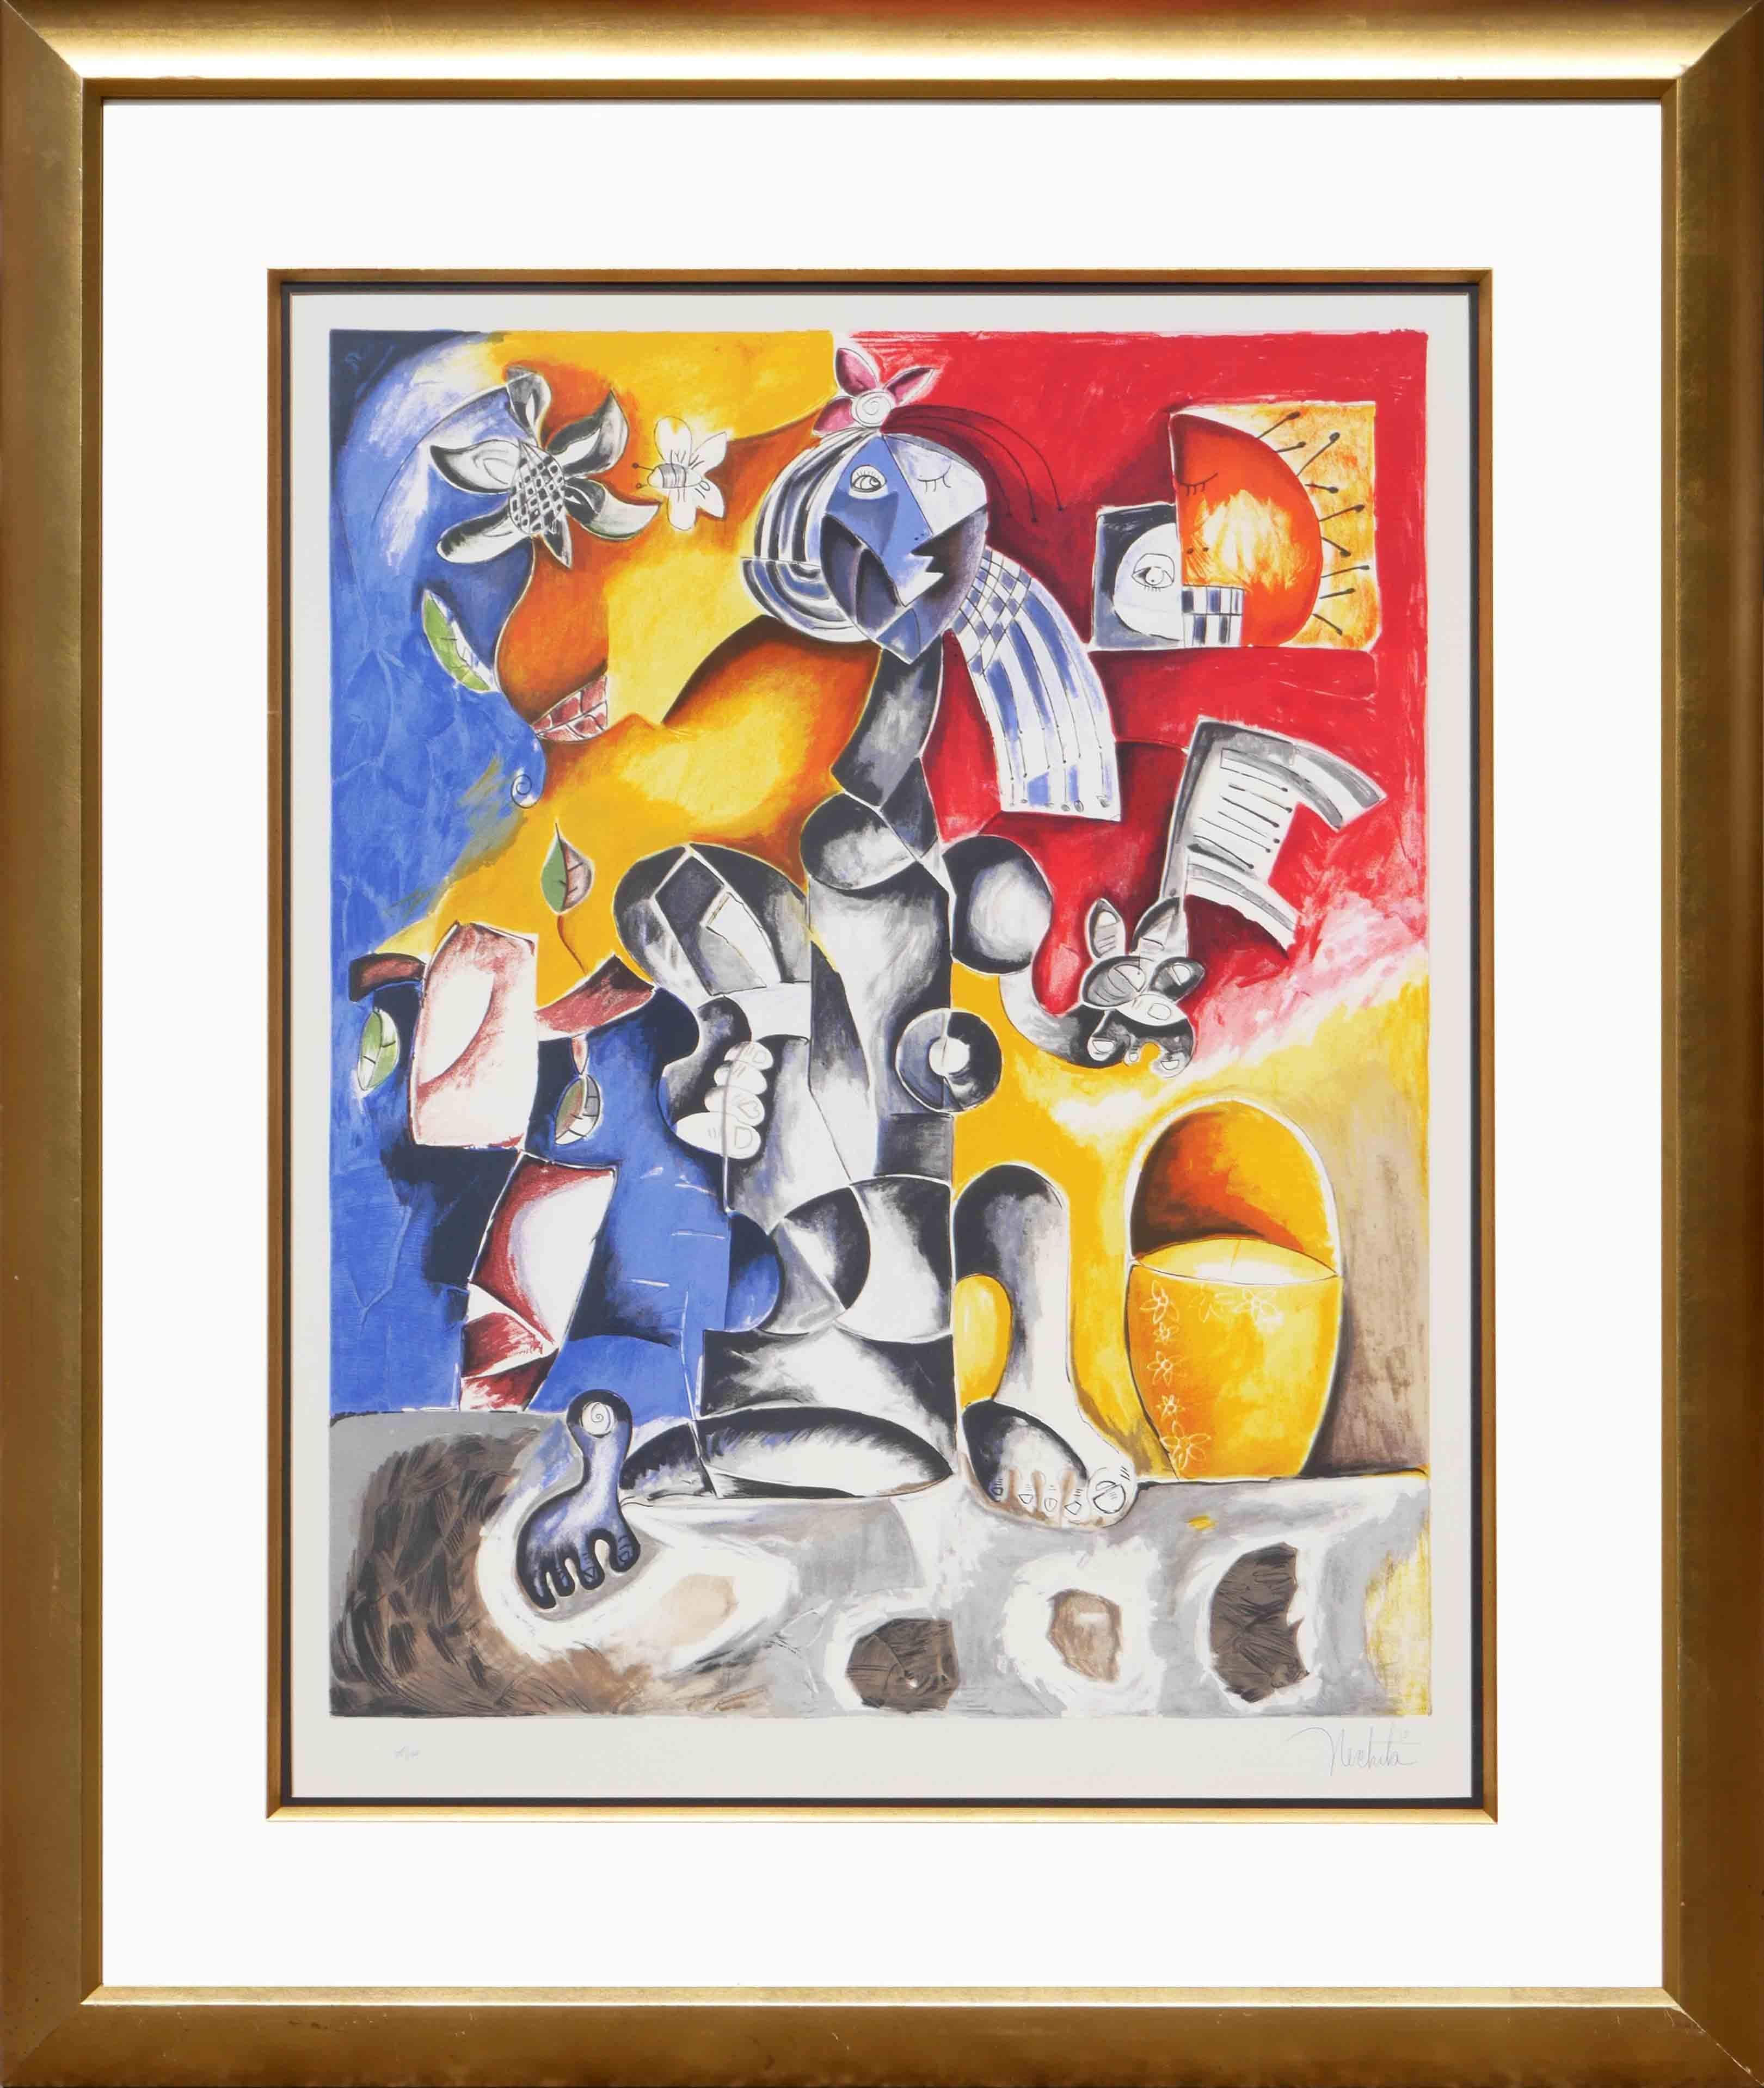 “Buckets of Detangler” Colorful Abstract Figurative Cubist Lithograph Ed 35/199